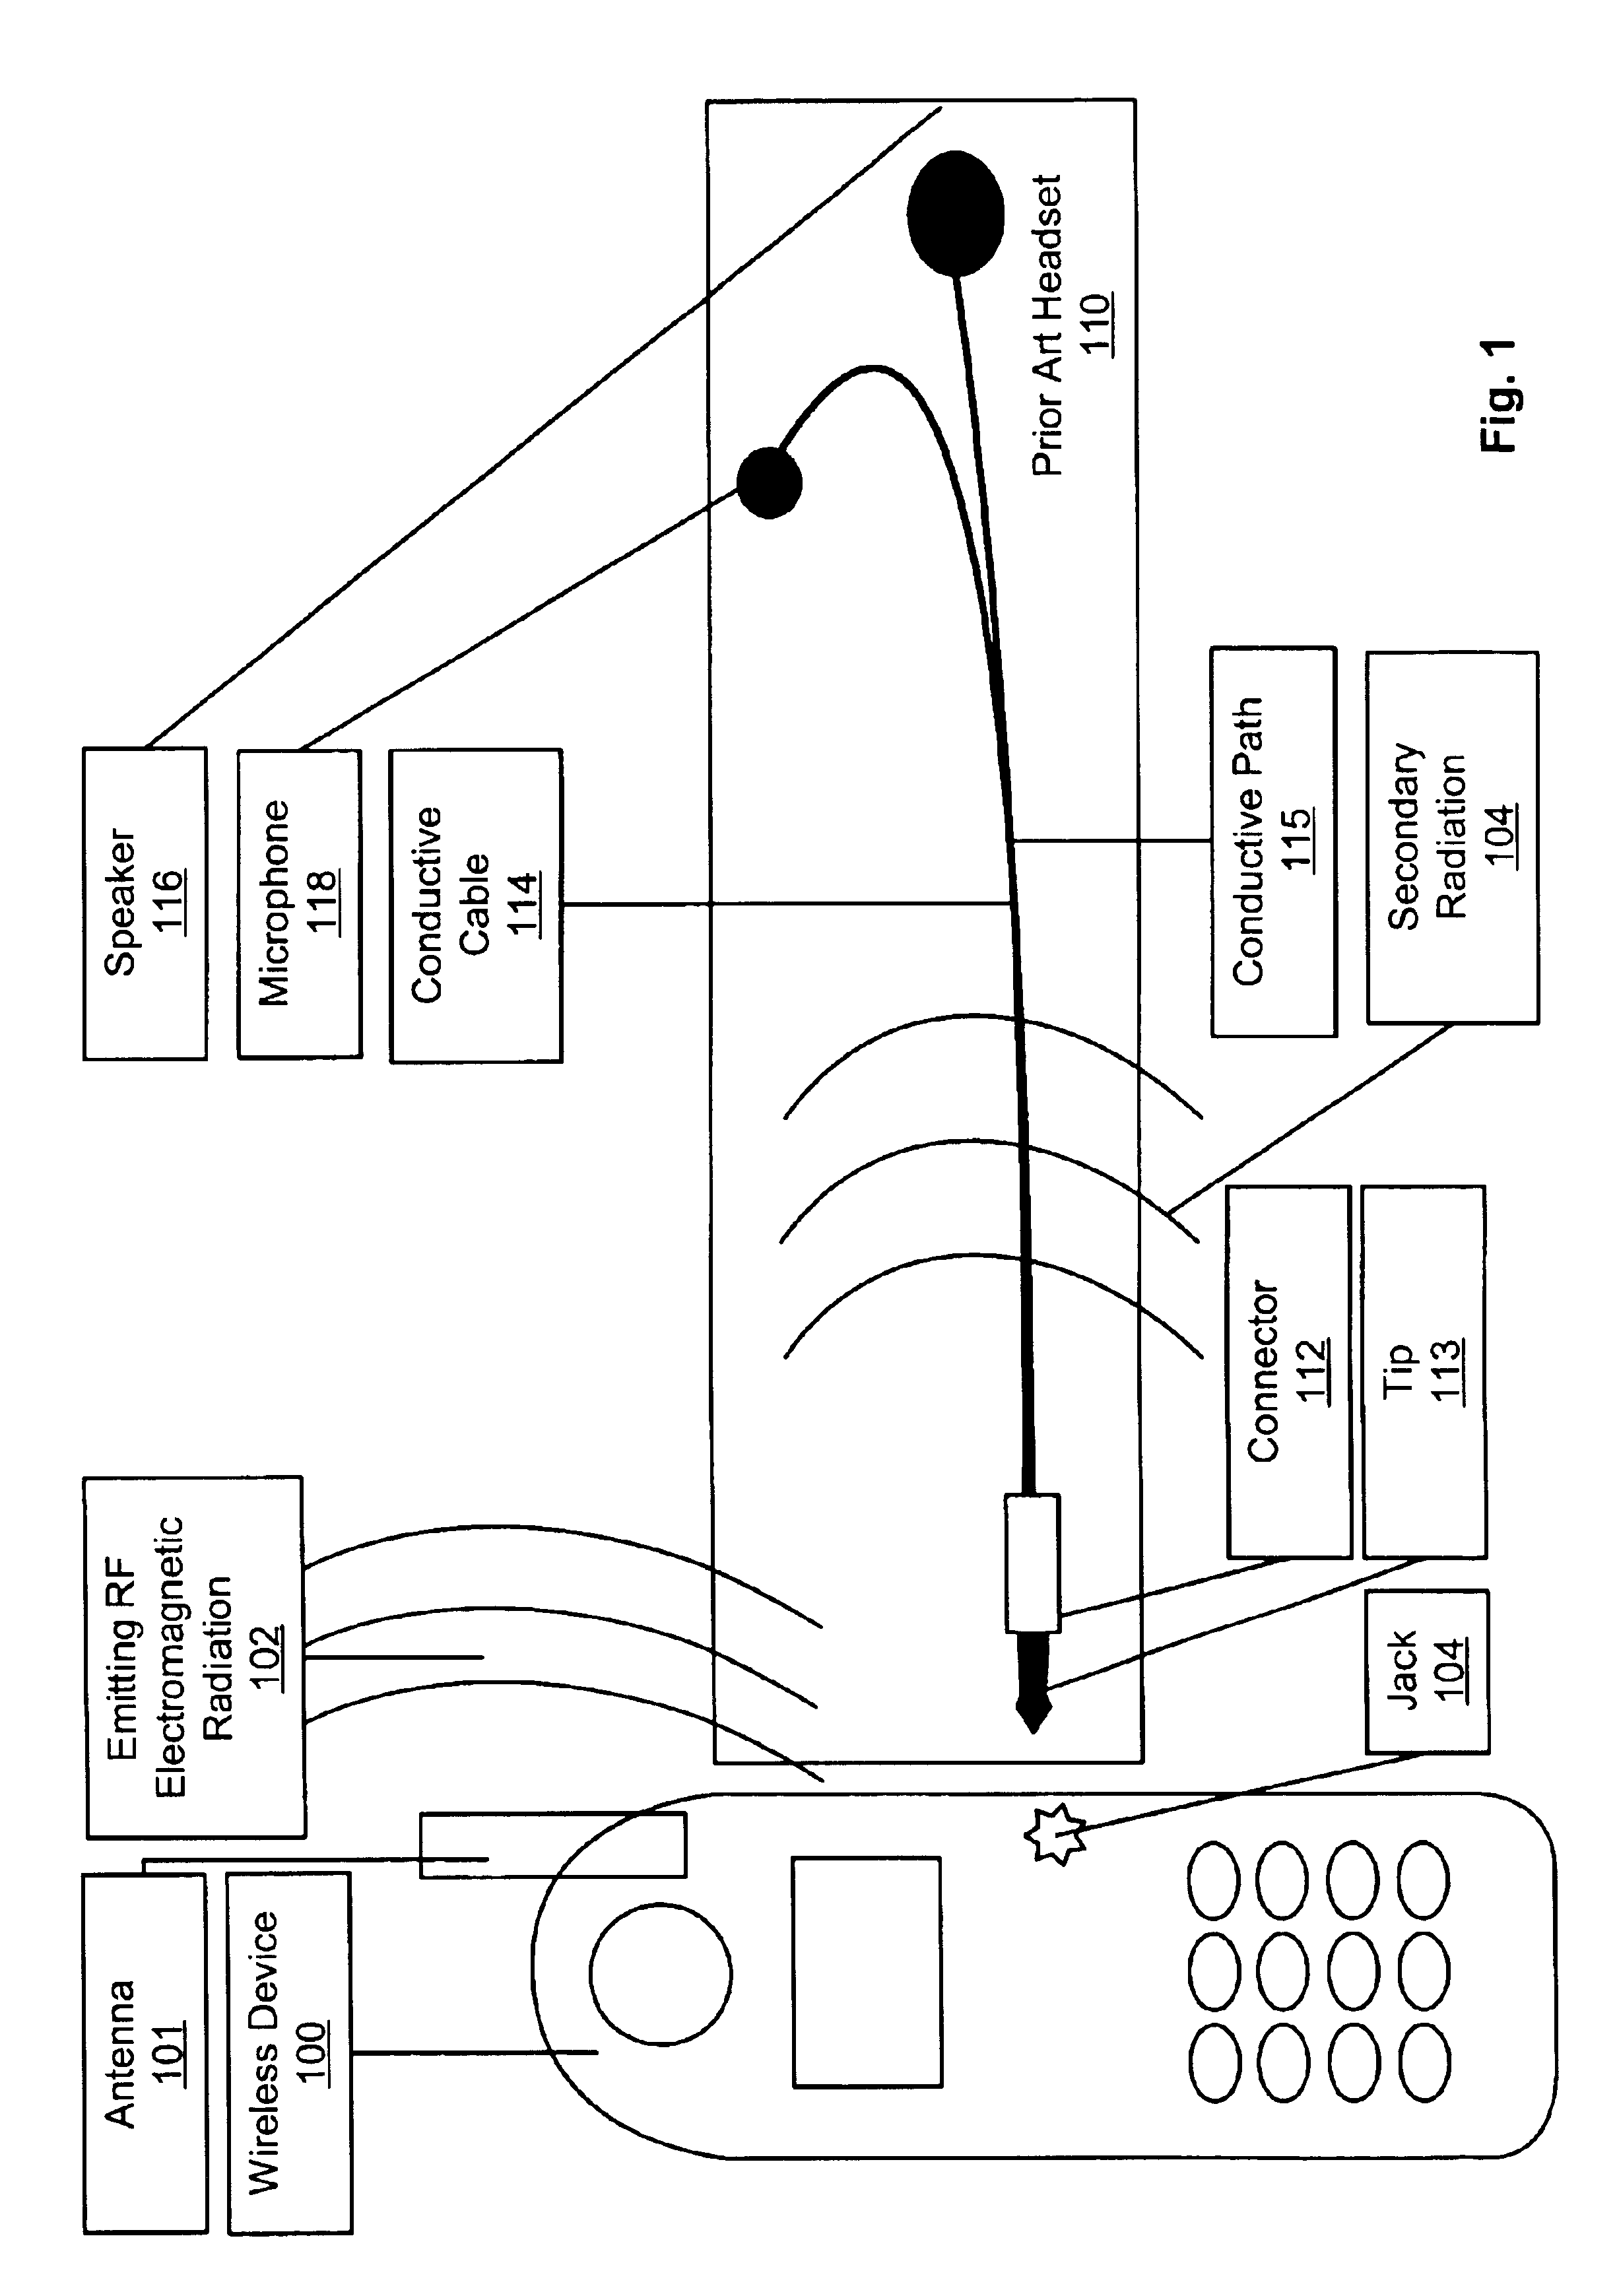 System and method for reducing exposure to electromagnetic radiation